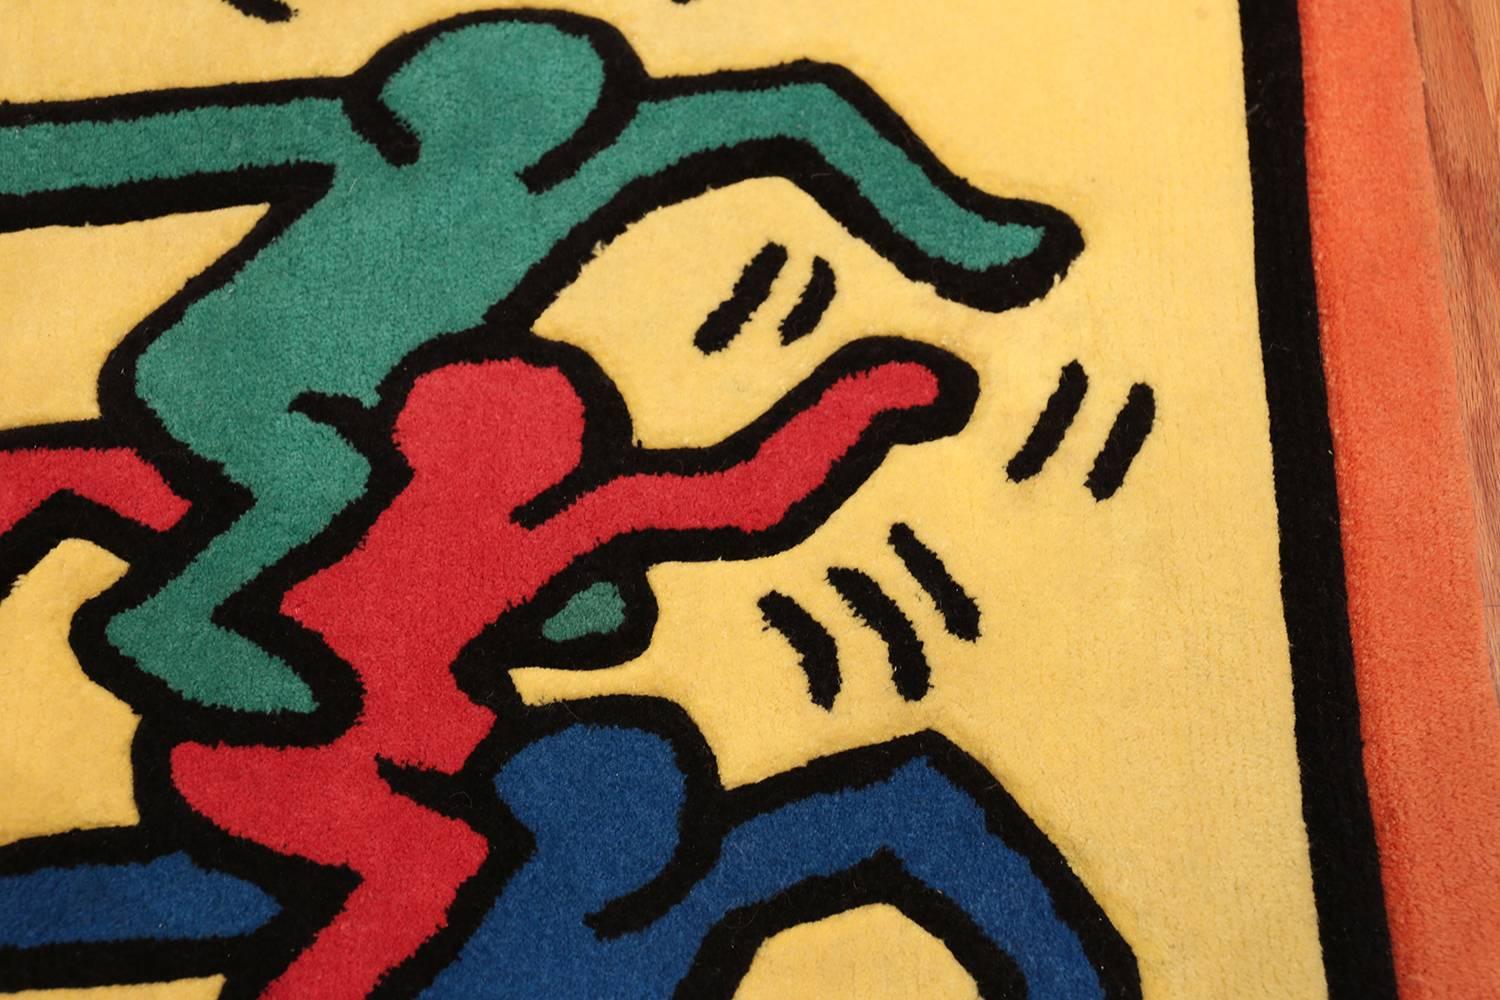 Mid-Century Modern Small Size Vintage American Rug Designed by Keith Haring. Size: 3 ft x 4 ft 